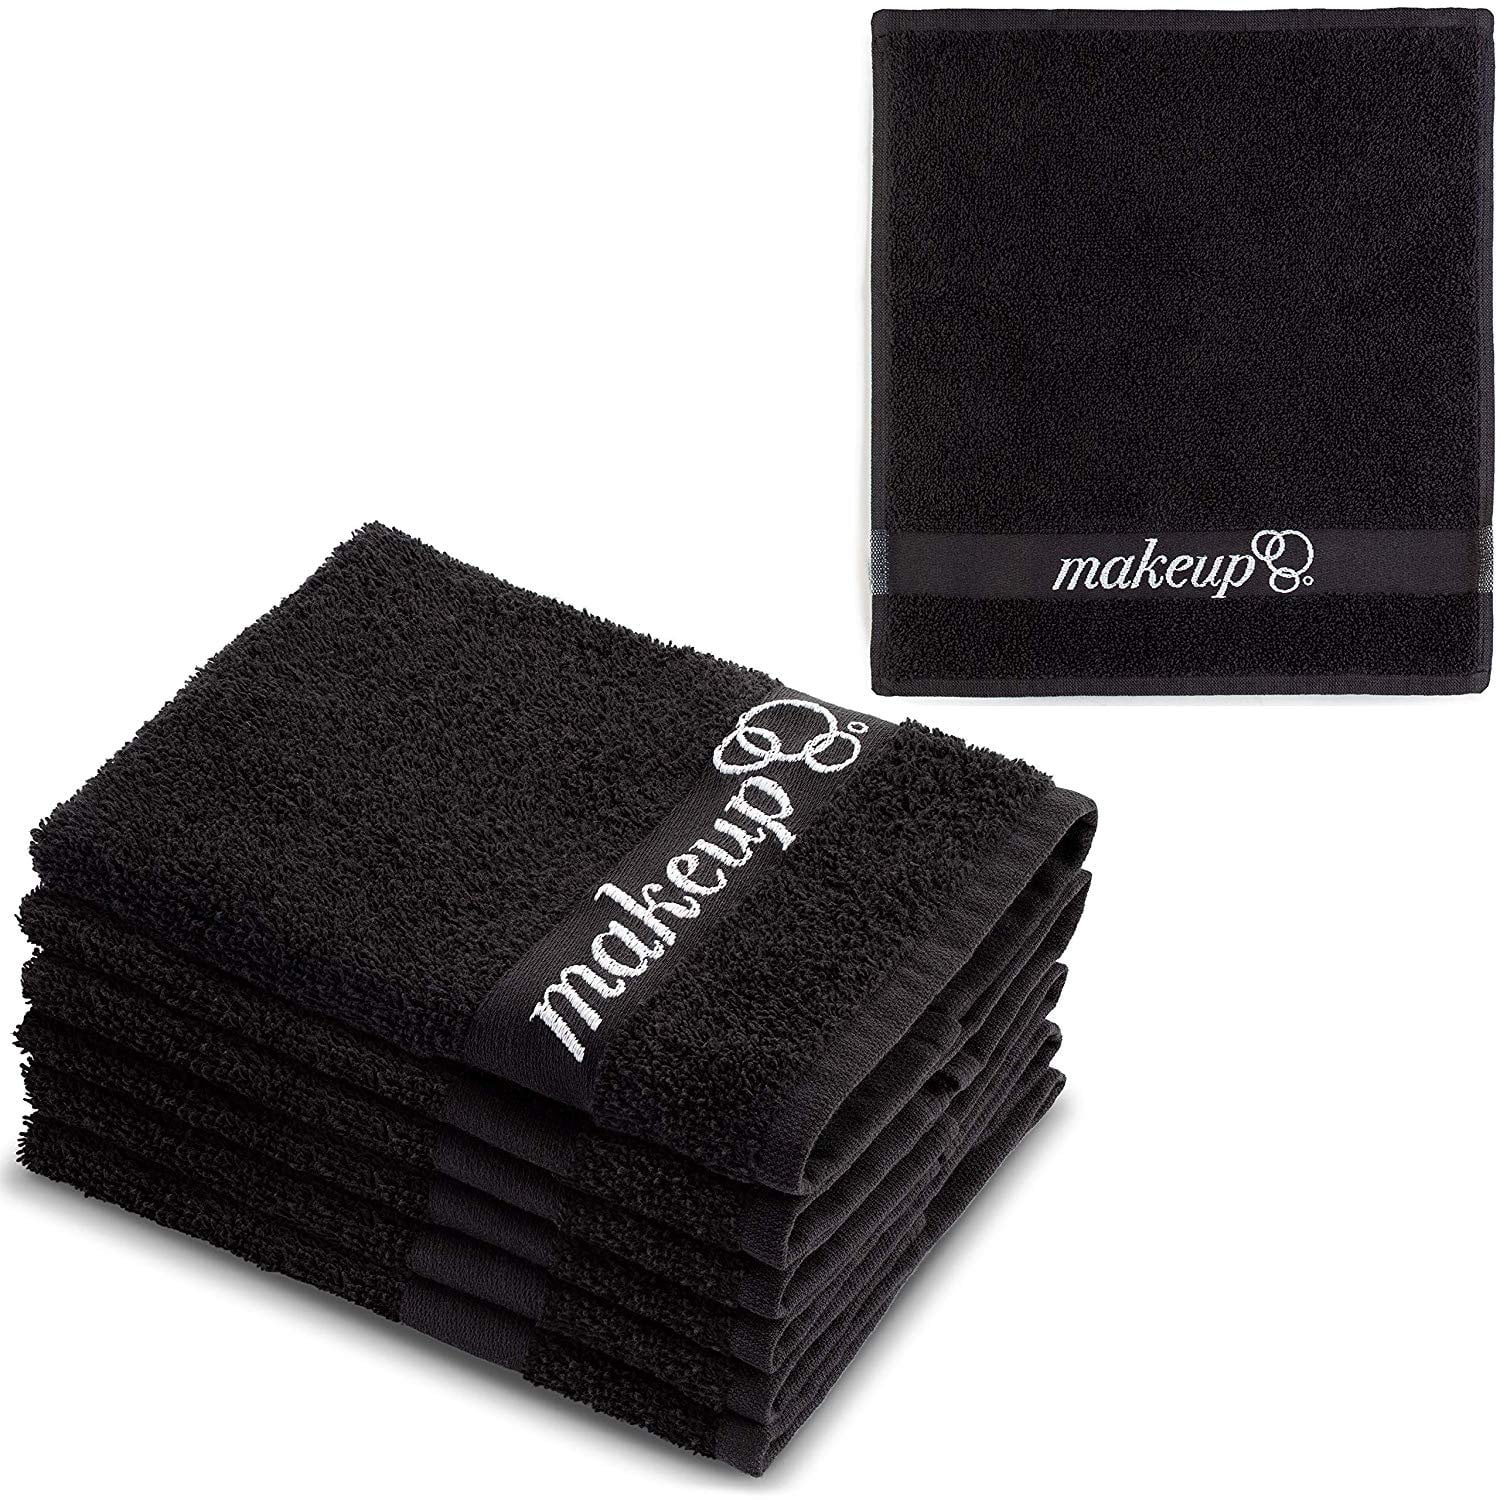 Soft Microfiber 13x13 Washcloth Reusable Embroidered 6 Pack of Makeup Towels